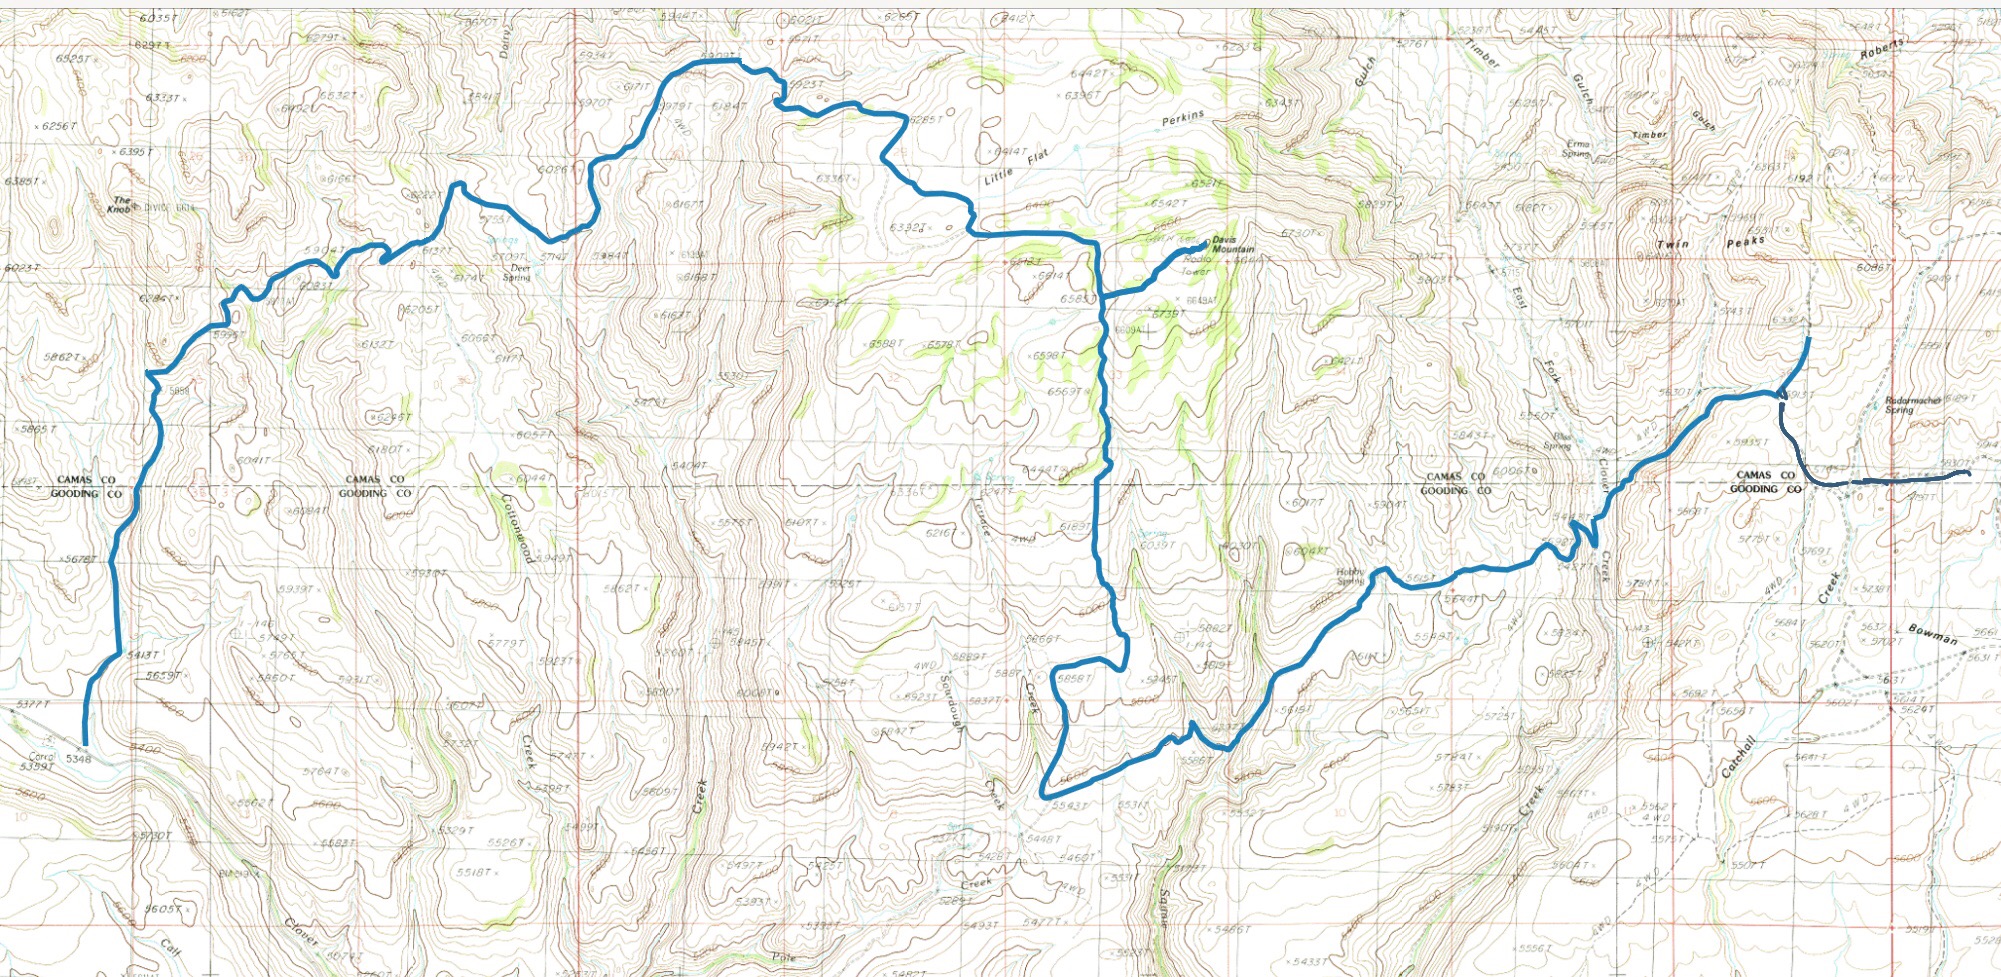 A GPS track for the Davis Mountain Road. This road requires a 4WD with skid plates, all terrain tires and a driver with a lot of patience between the East Fork Clover Creek in the east and the Knob in the west. Bewlare it is a challenging road.